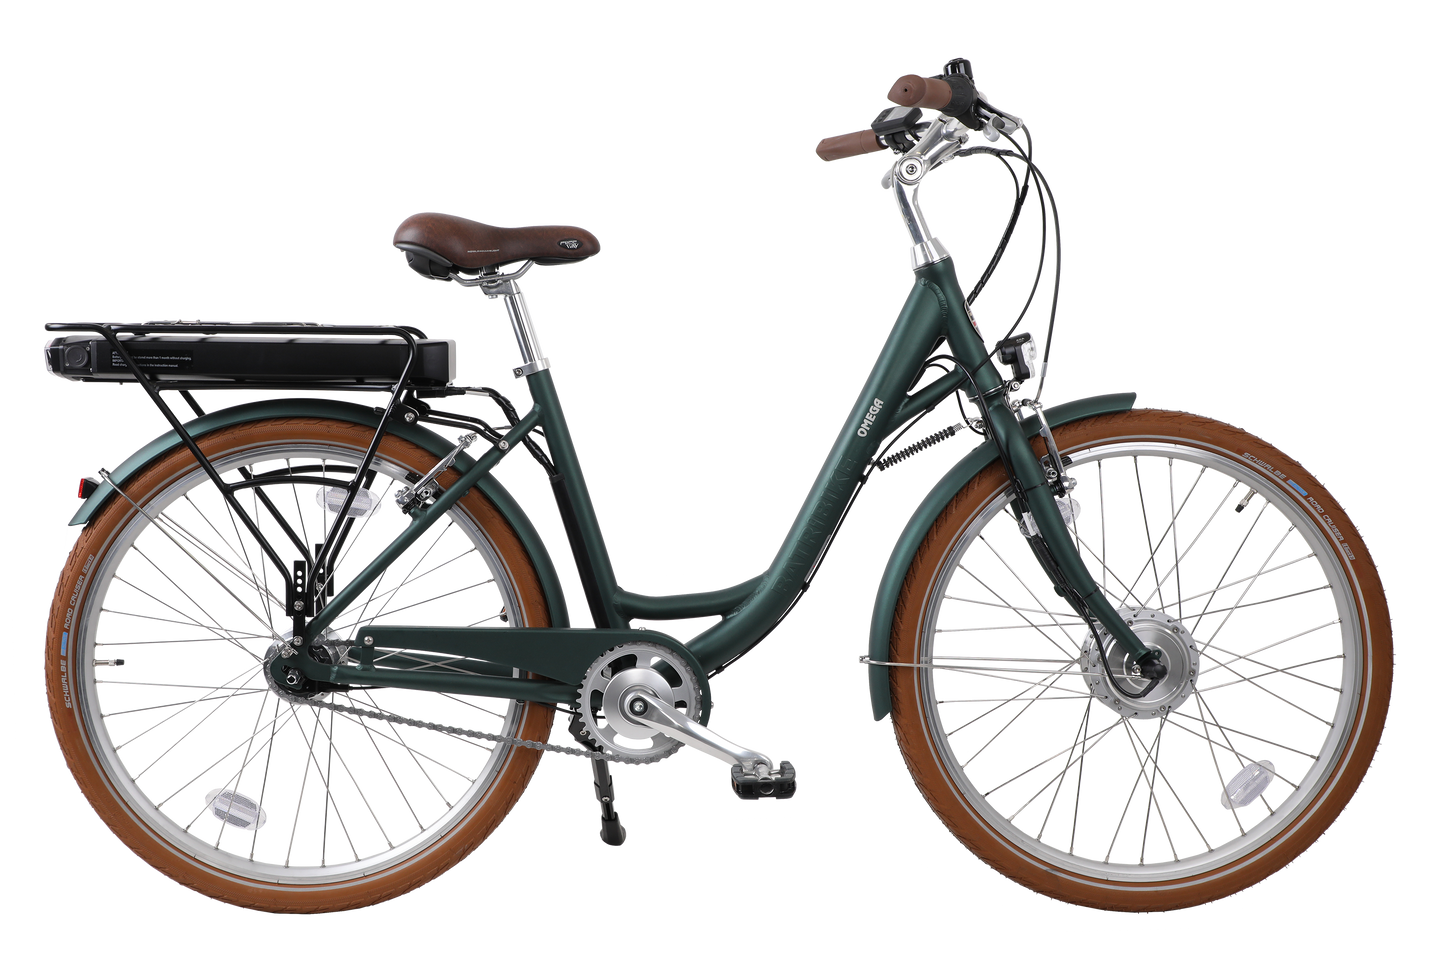 Omega step through, low seat electric bike with 26